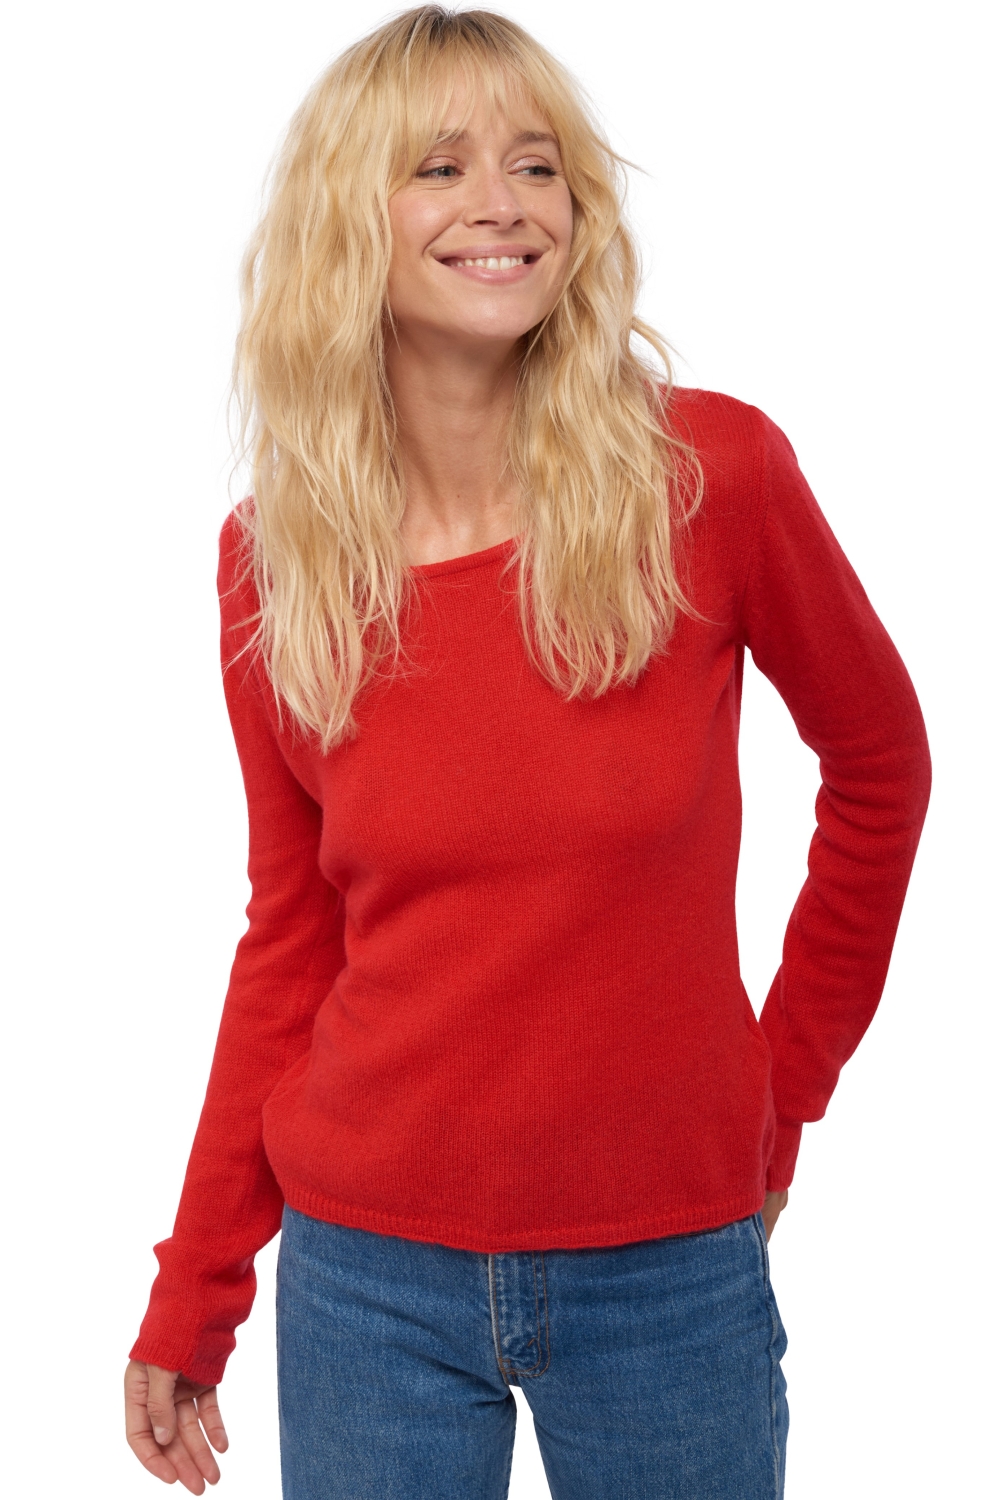 Cashmere ladies basic sweaters at low prices caleen rouge xs